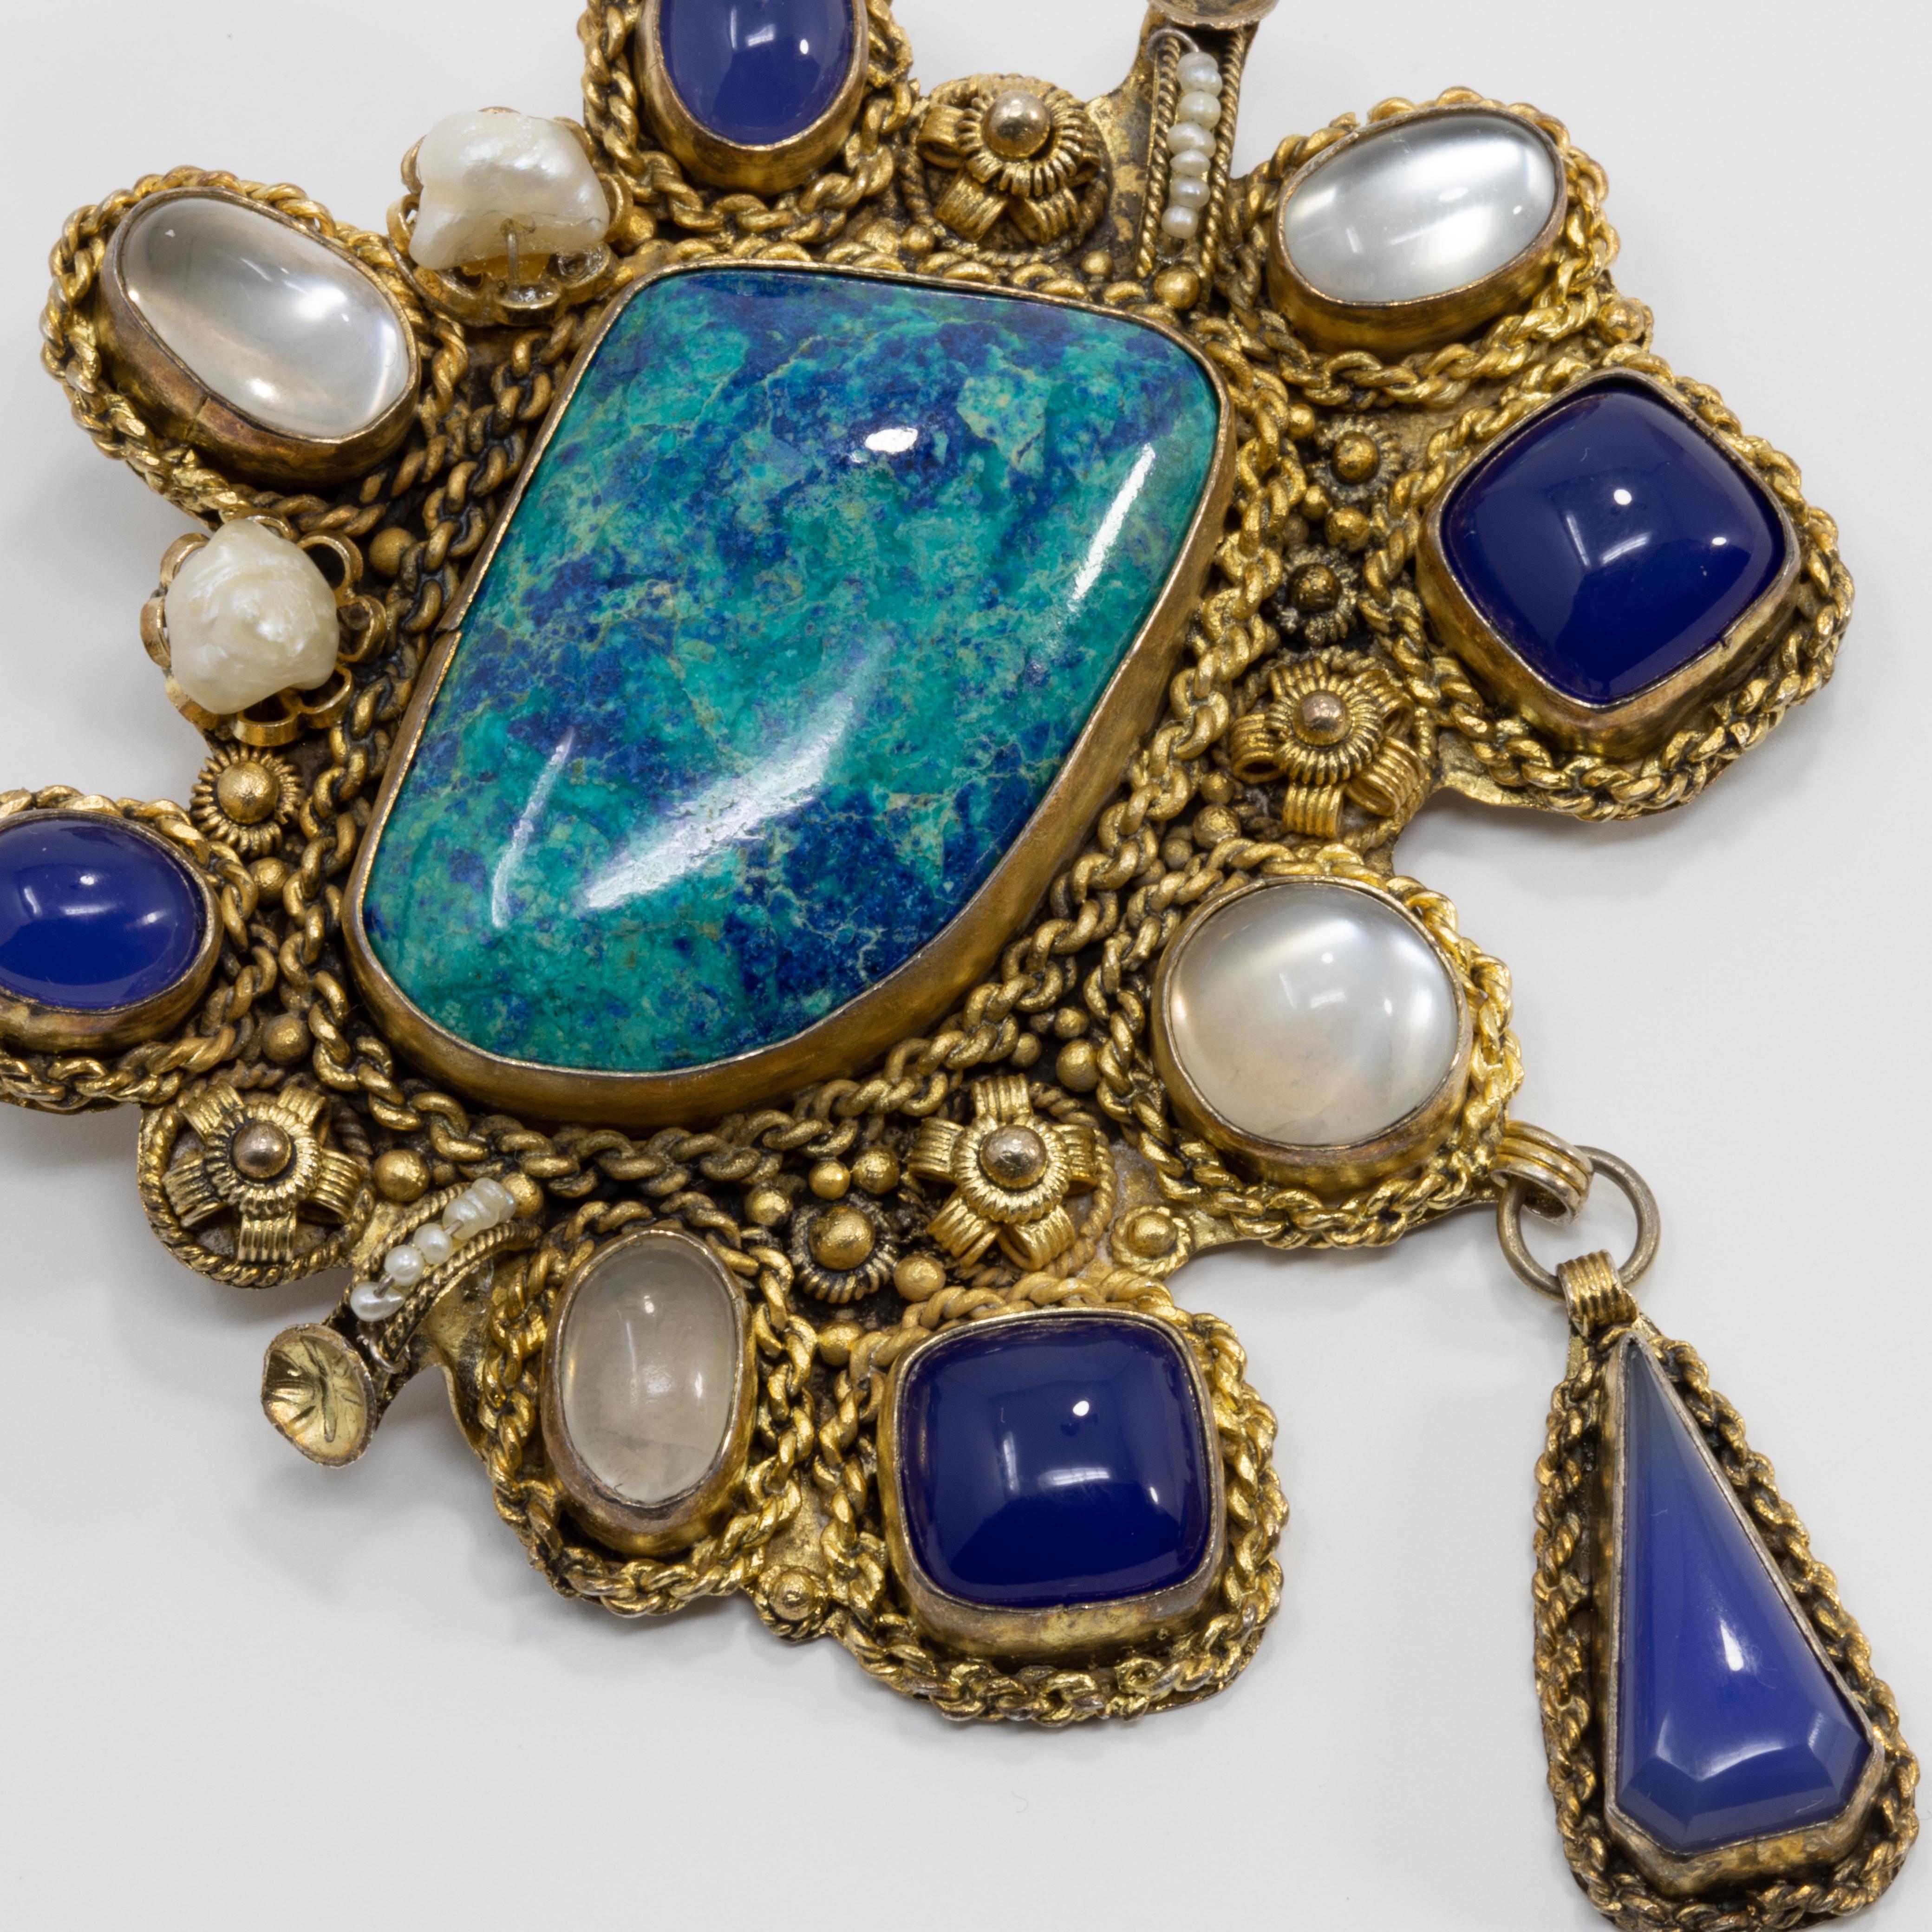 A large pendant with a dangling motif. Perfect when you need to make a statement! Features an assortment of natural gemstones including quartz and mother of pearl. Colors include an assortment of opaque white, blue, and teal. Set in an accented gilt